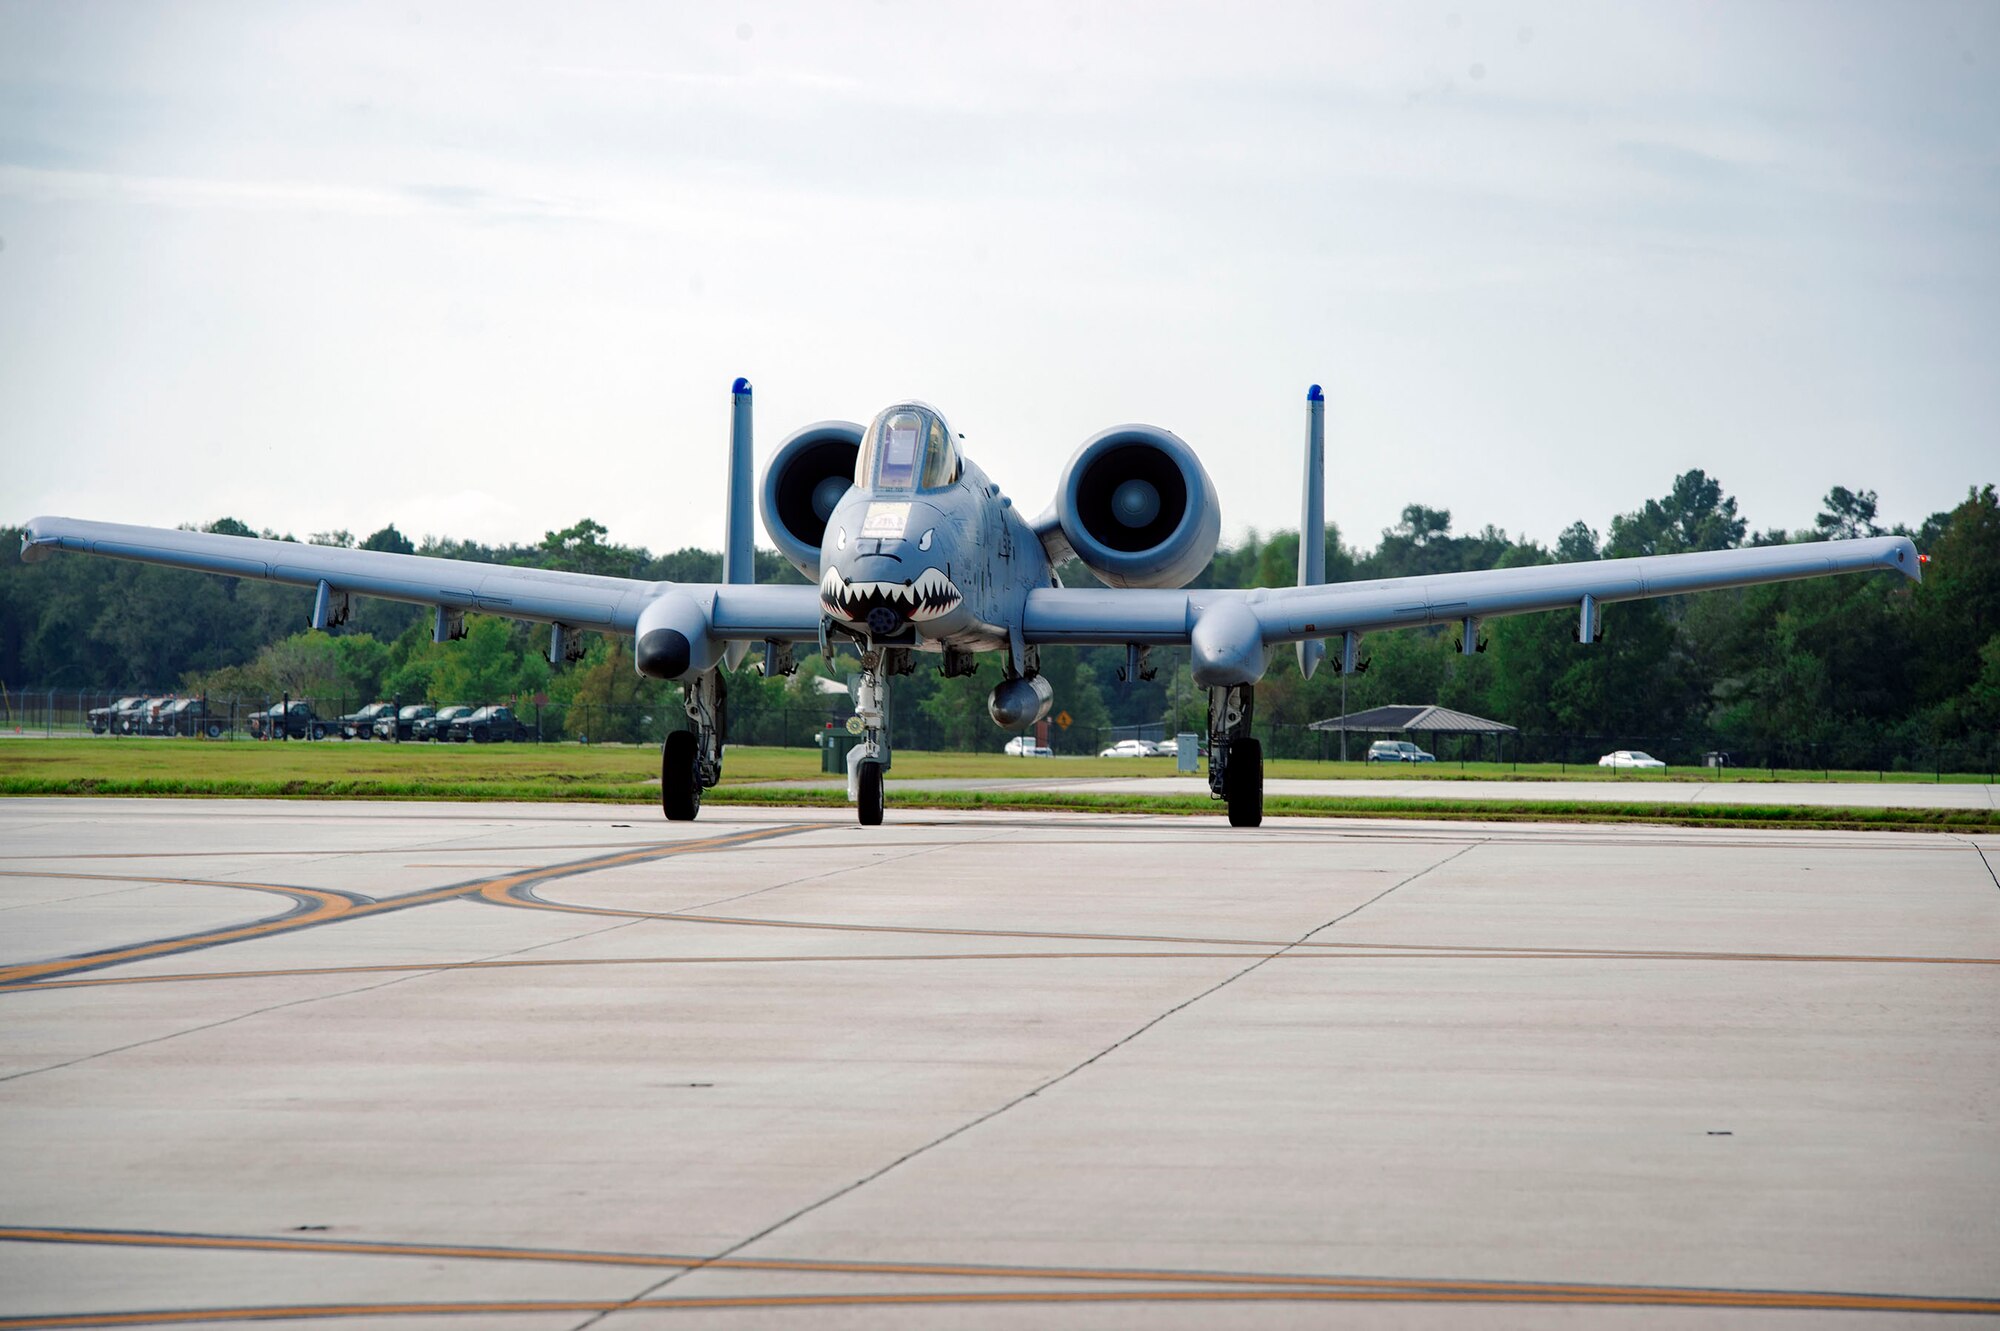 An A-10C Thunderbolt II taxis the runway to relocate in anticipation of Hurricane Michael, Oct. 9, 2018, at Moody Air Force Base, Ga. While it is expected to be a Category 2 upon landfall, the current forecast anticipates Moody and the surrounding area will face tropical-storm-force winds Wednesday afternoon. (U.S. Air Force photo by Senior Airman Greg Nash)